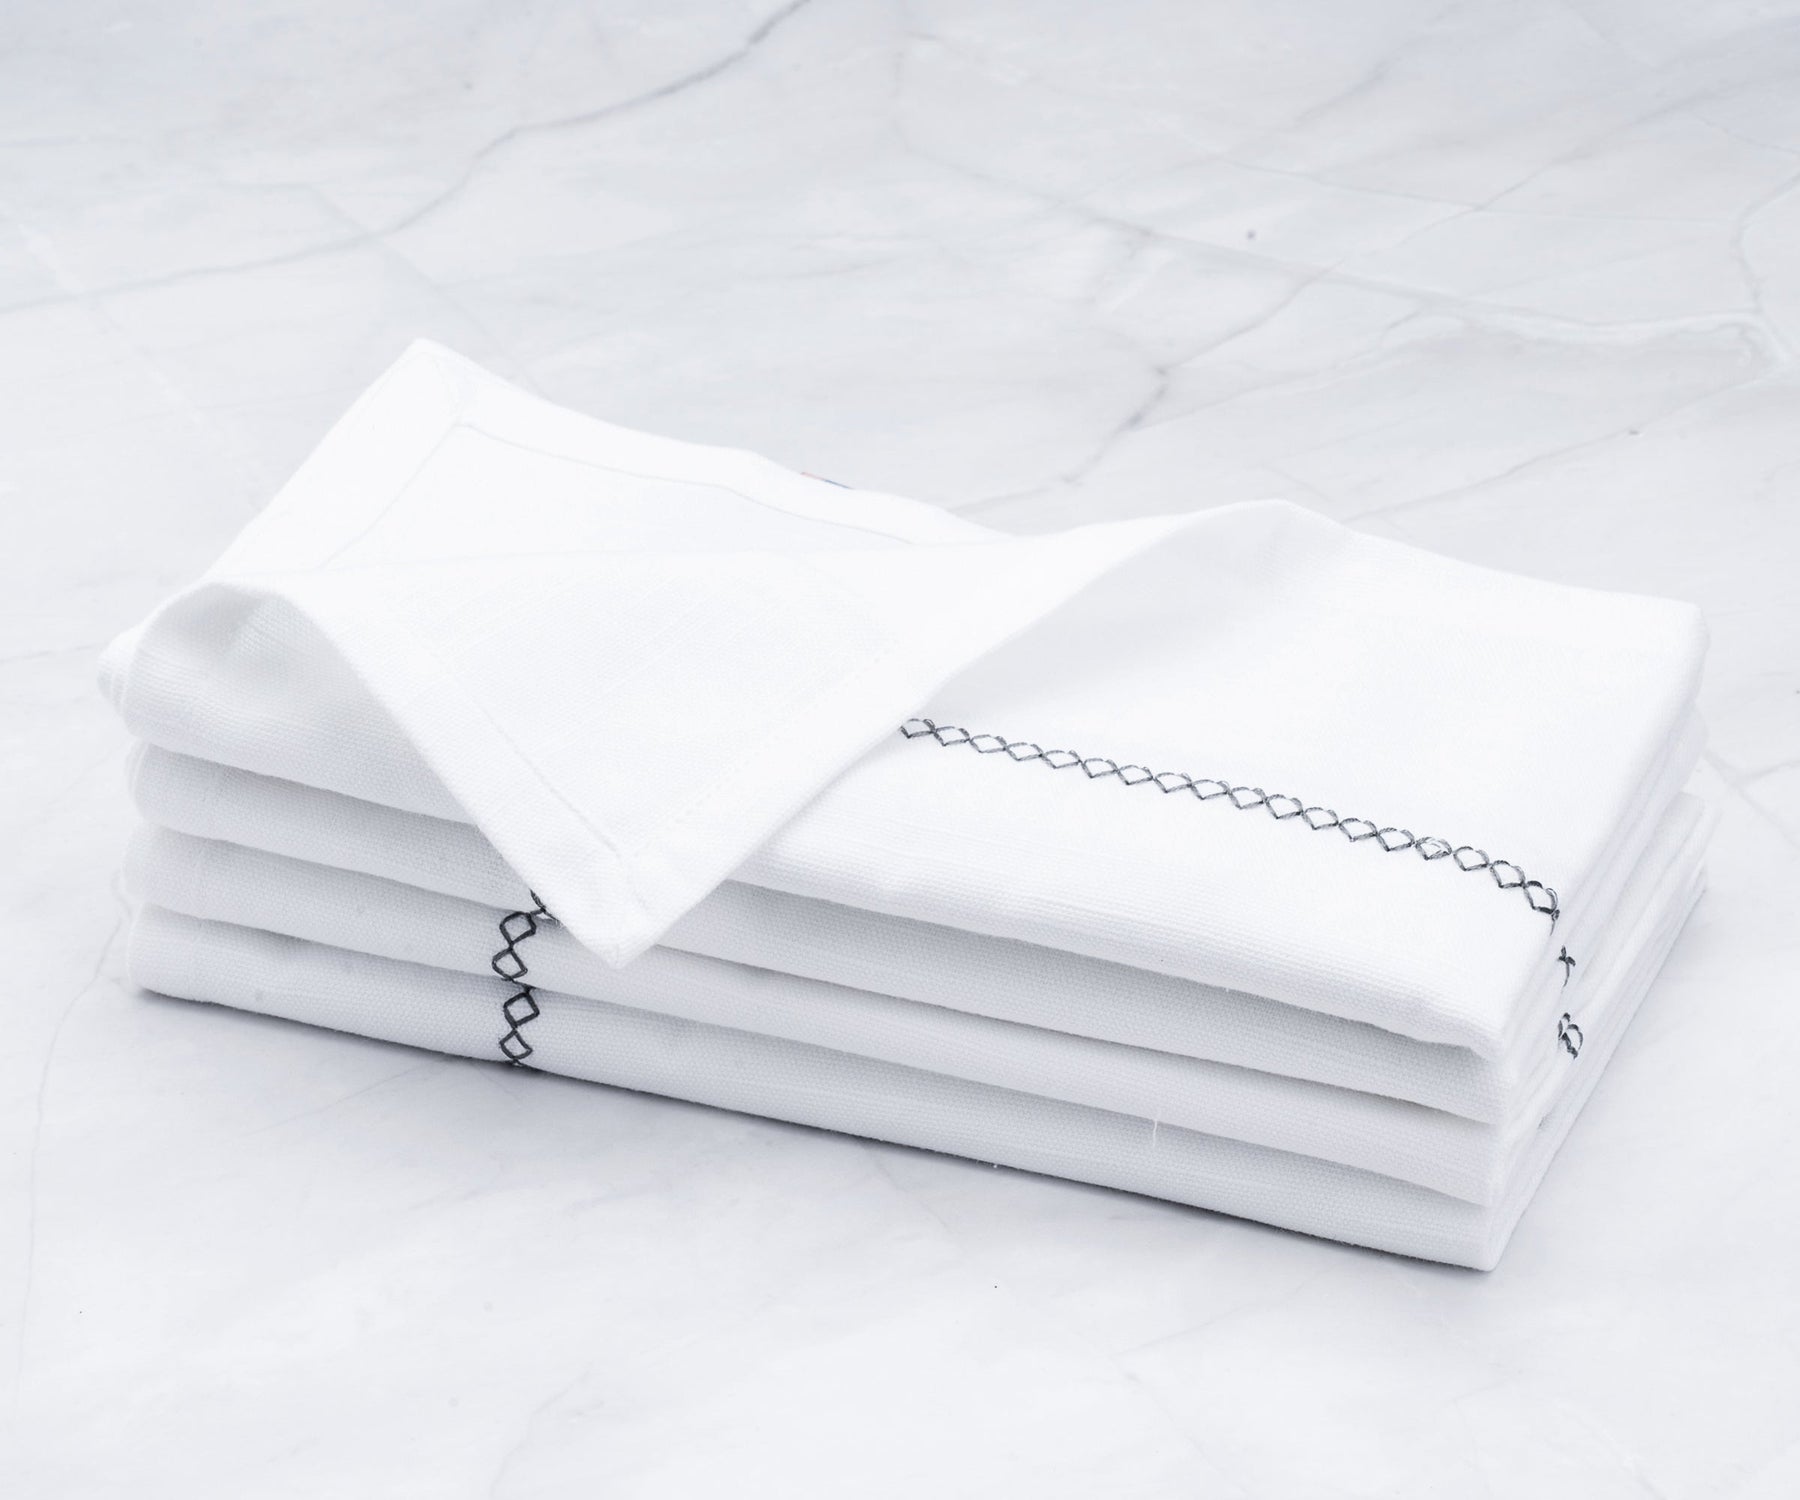 There are cloth dinner napkins, Vanity Fair dinner napkins, neatly folded dinner napkins, white cotton napkins, and instructions on how to fold napkins for dinner.